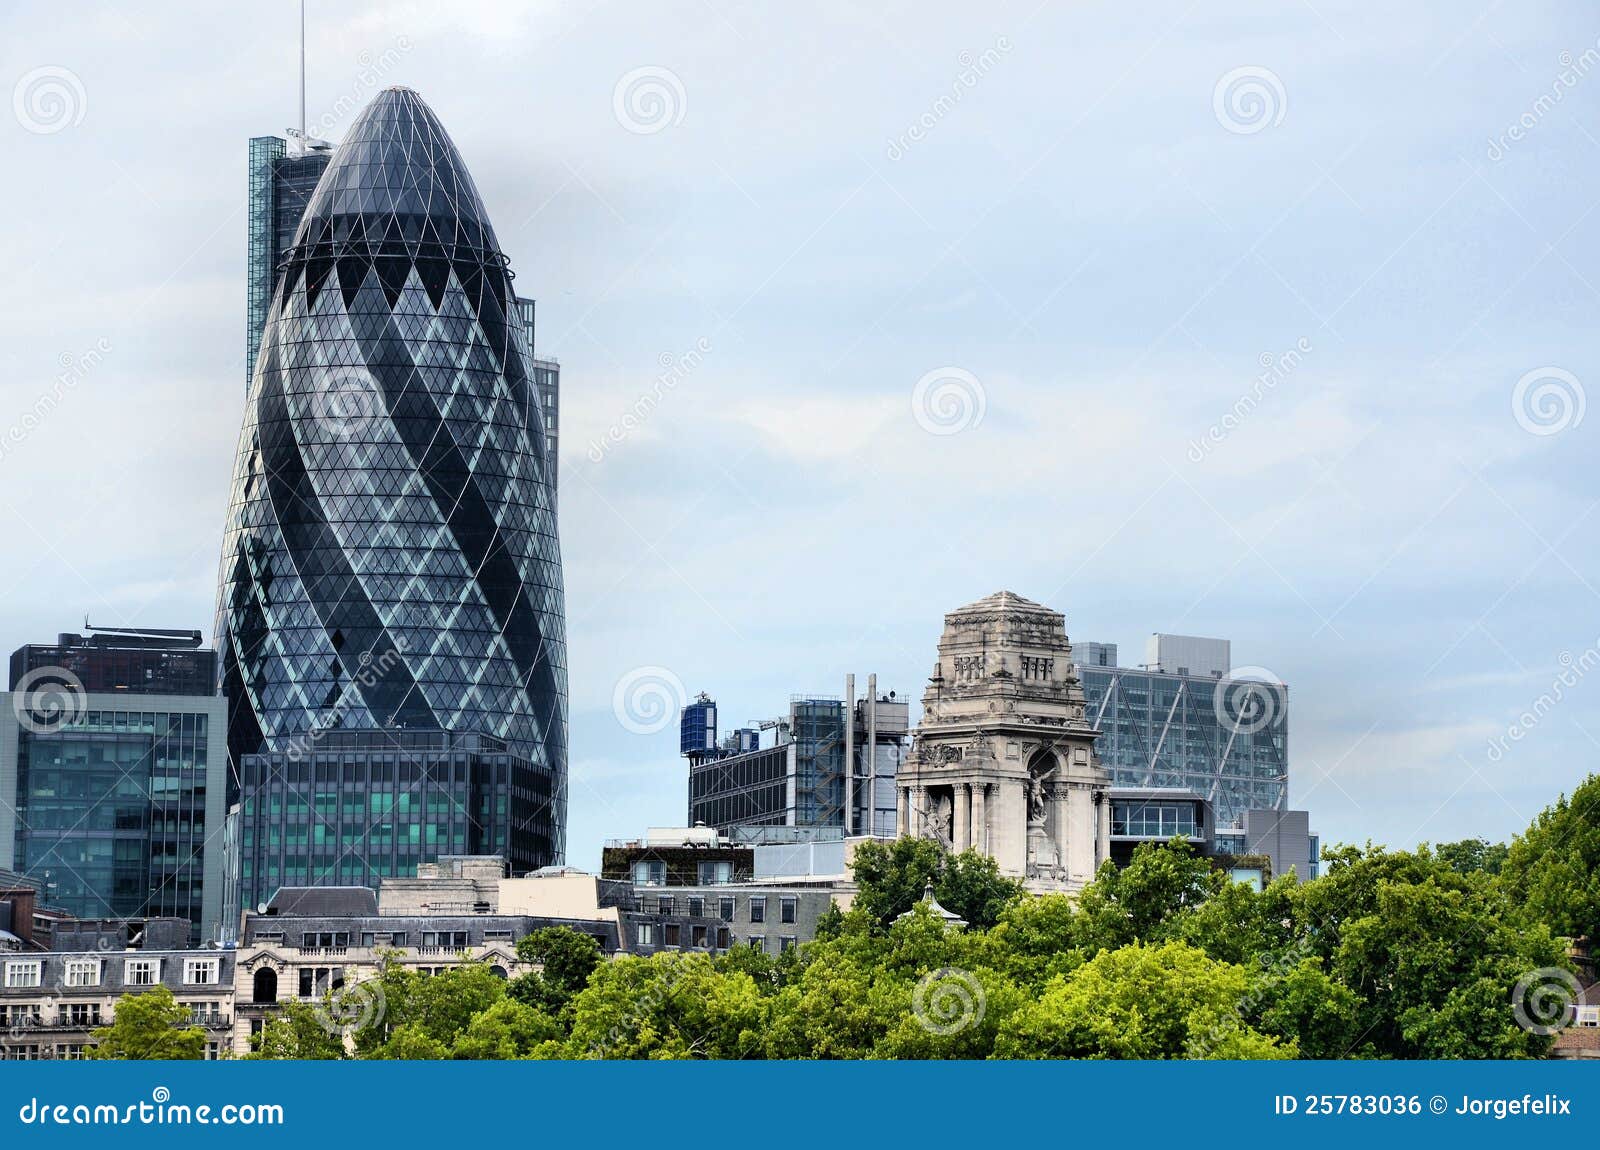 Buildings stock photo. Image of architecture, historic - 25783036